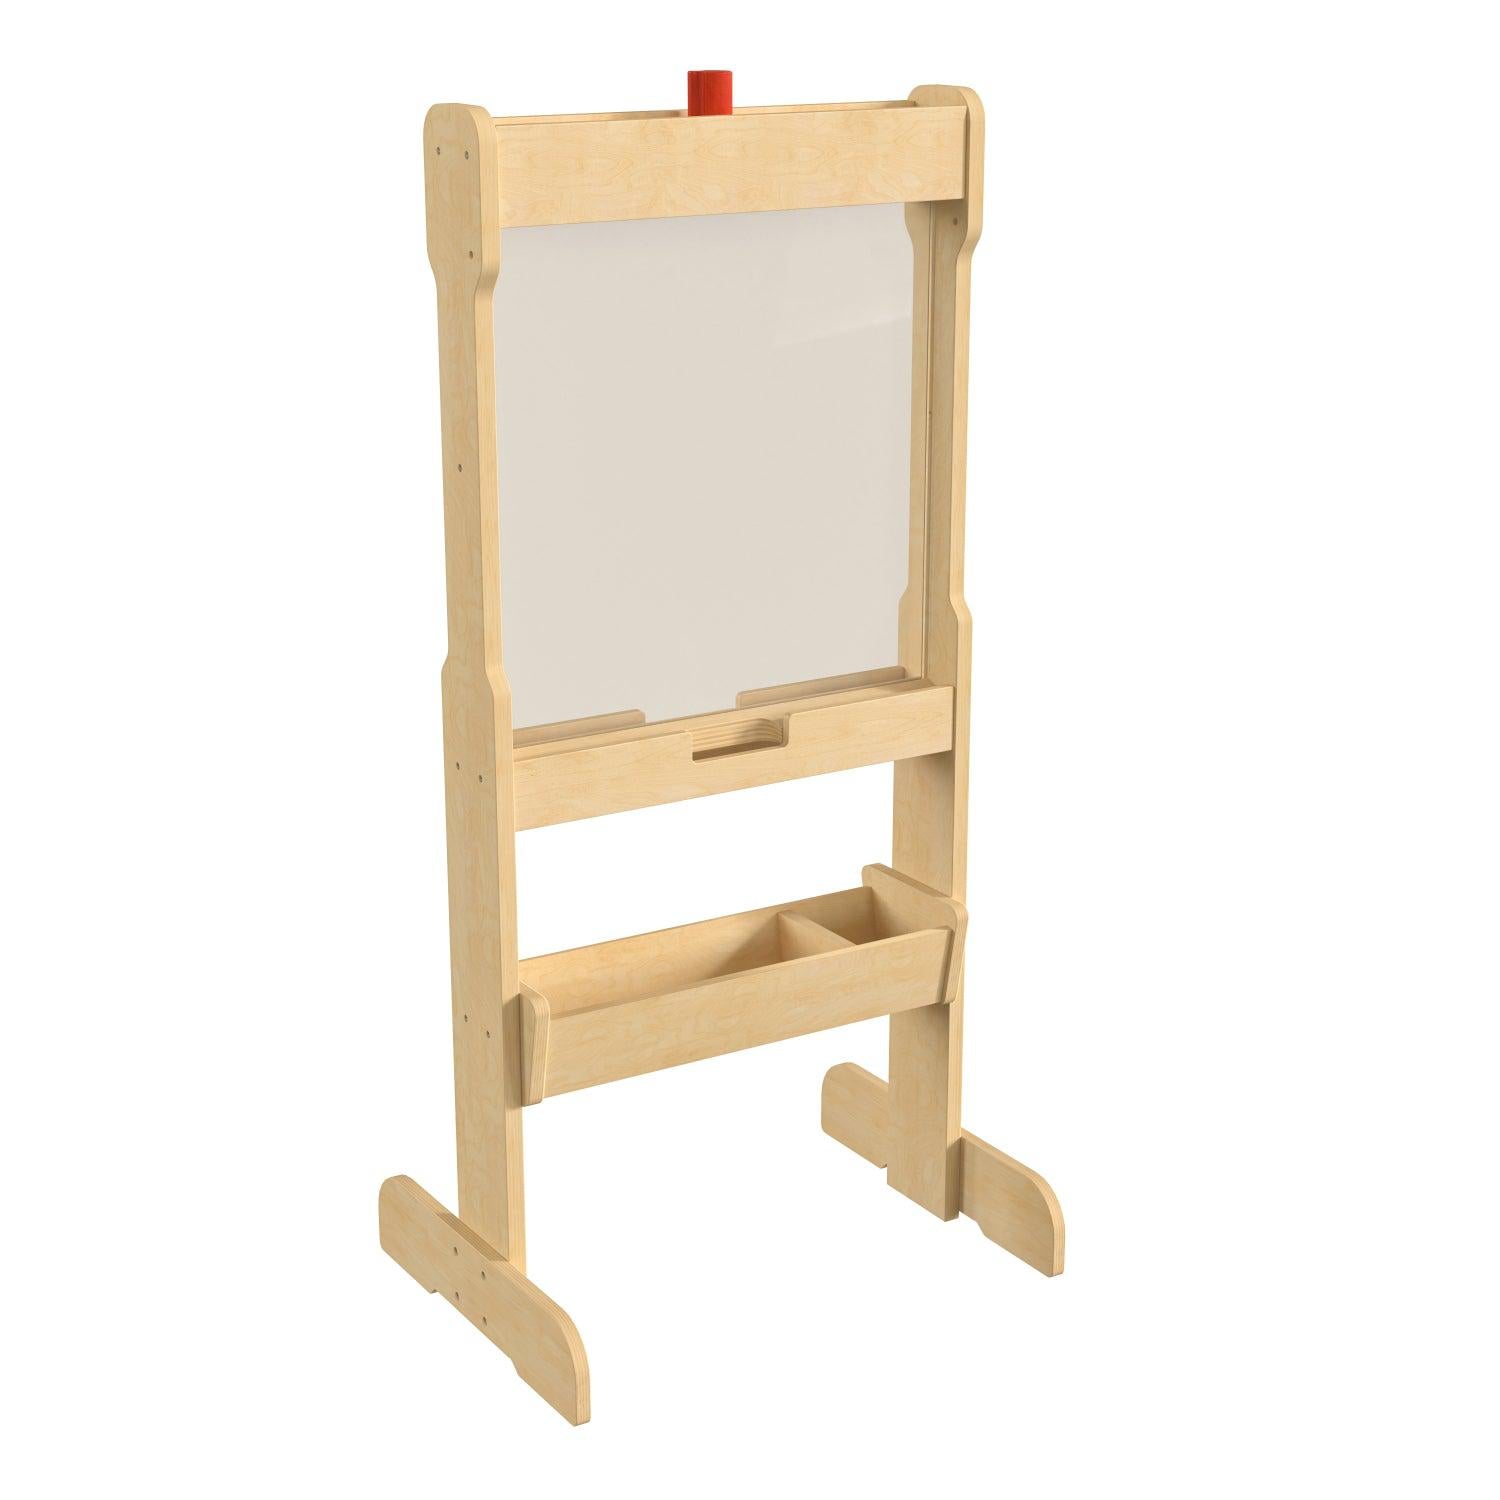 Bright Beginnings Commercial Grade Double Sided Wooden Free-Standing STEAM Easel, Storage Tray, Acrylic Paint Window, Holds Two Accessory Panels, Natural Finish